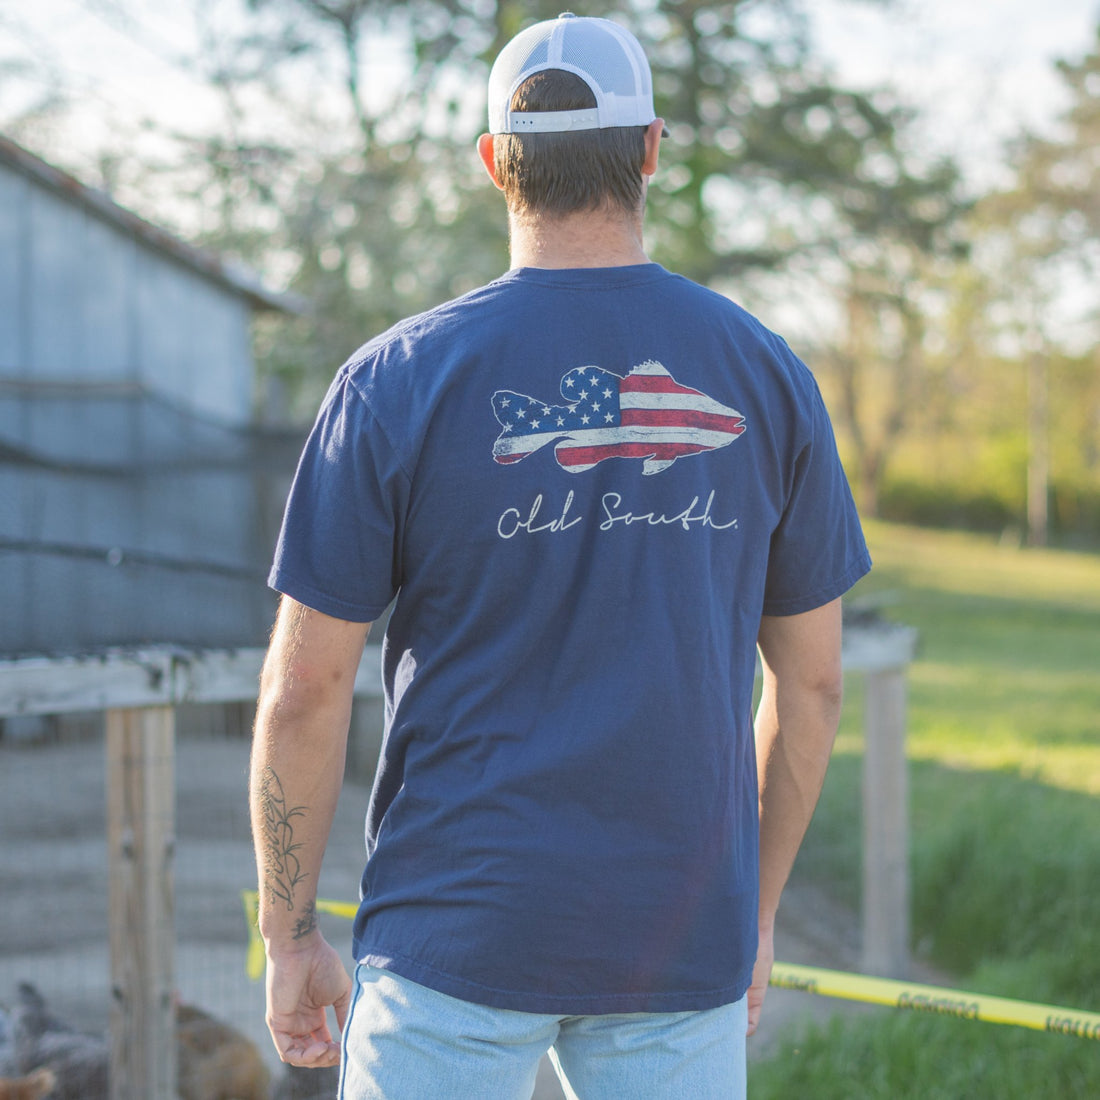 Bass American Flag Short Sleeve Tee by Old South